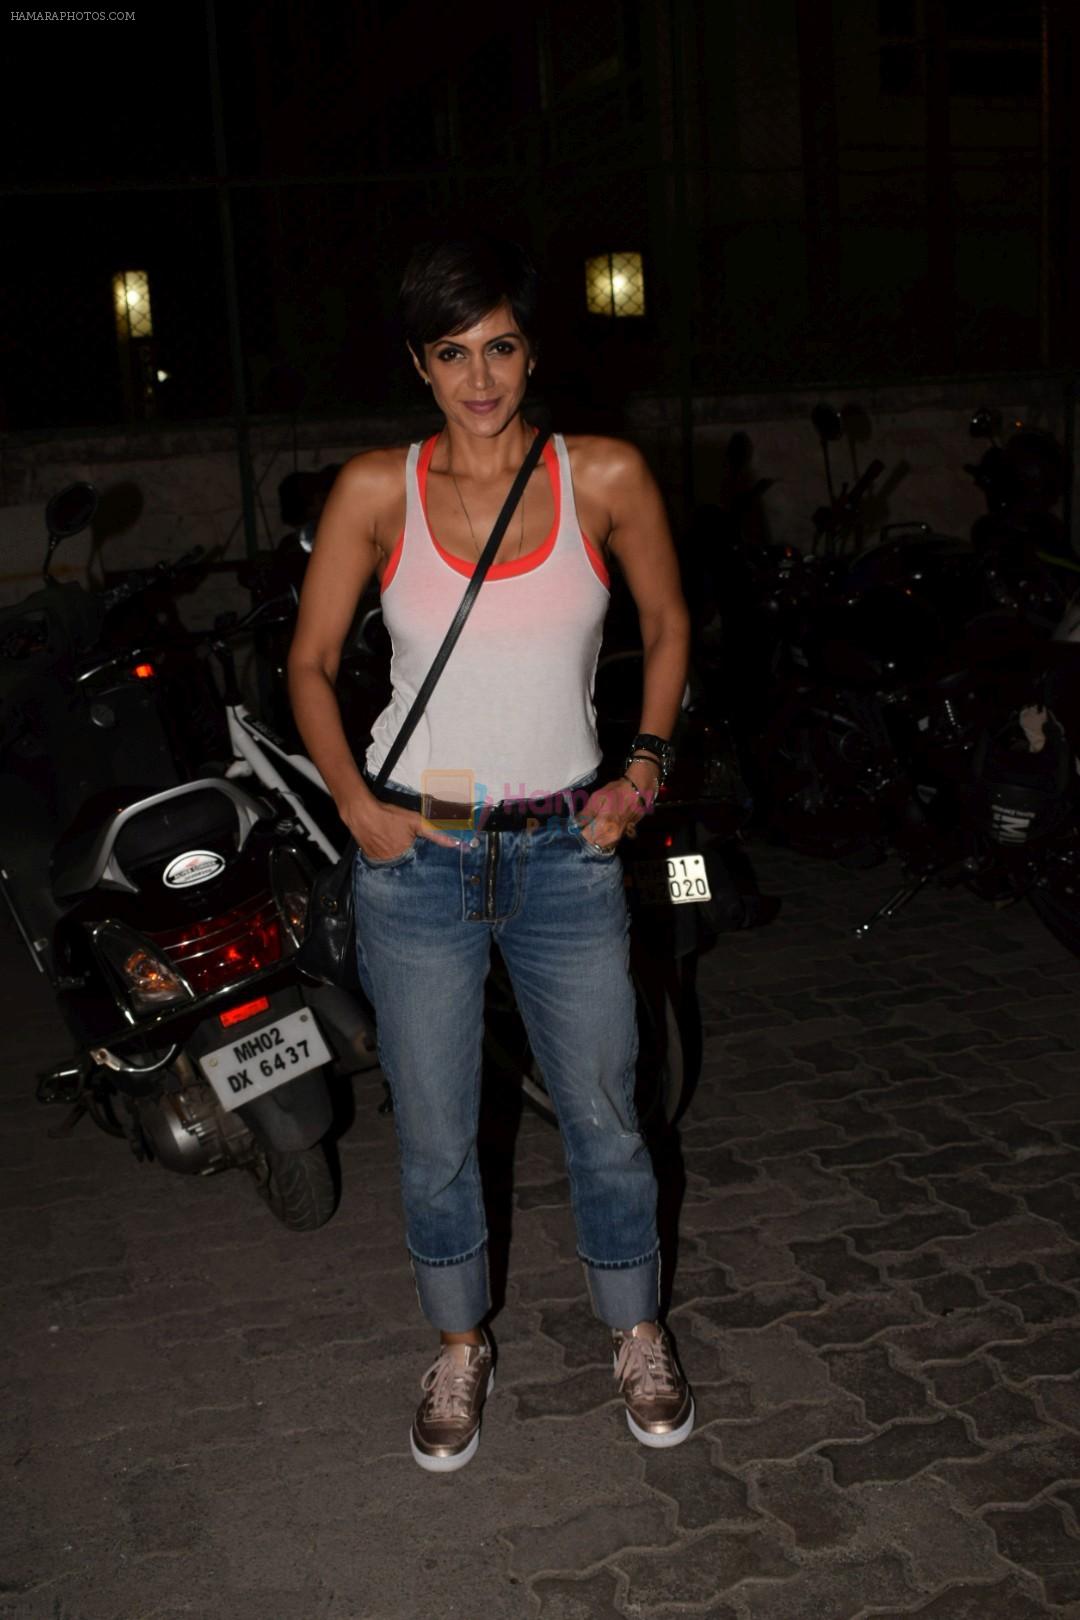 Mandira Bedi at Roots Premiere League Spring Season 2018 For Amateur Football In India on 14th March 2018